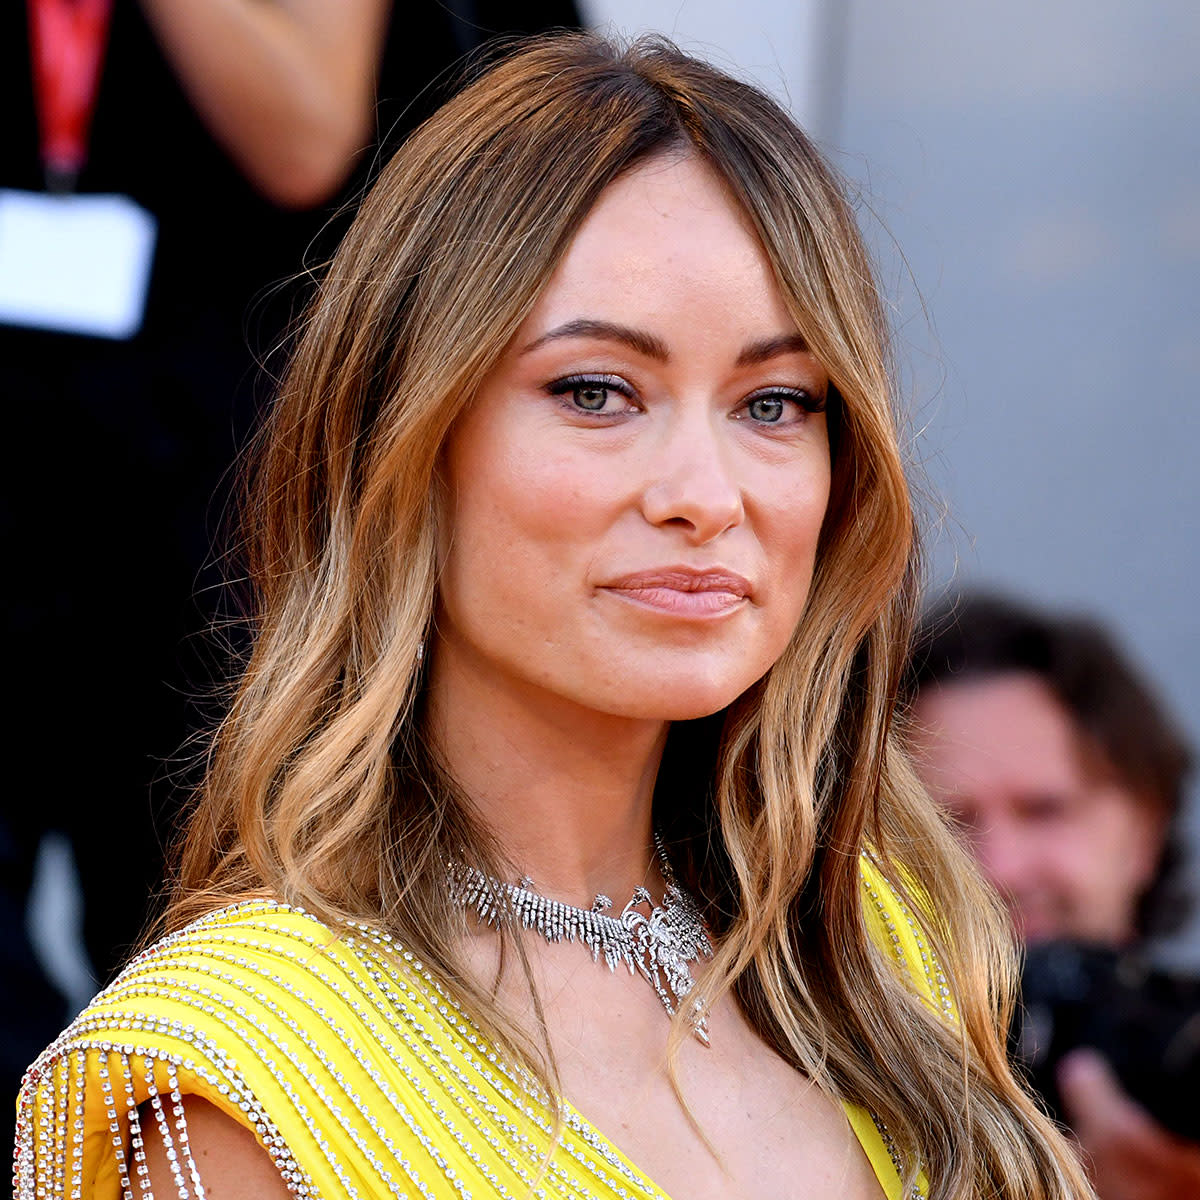 Olivia Wilde at the 'Don't Worry Darling' premiere